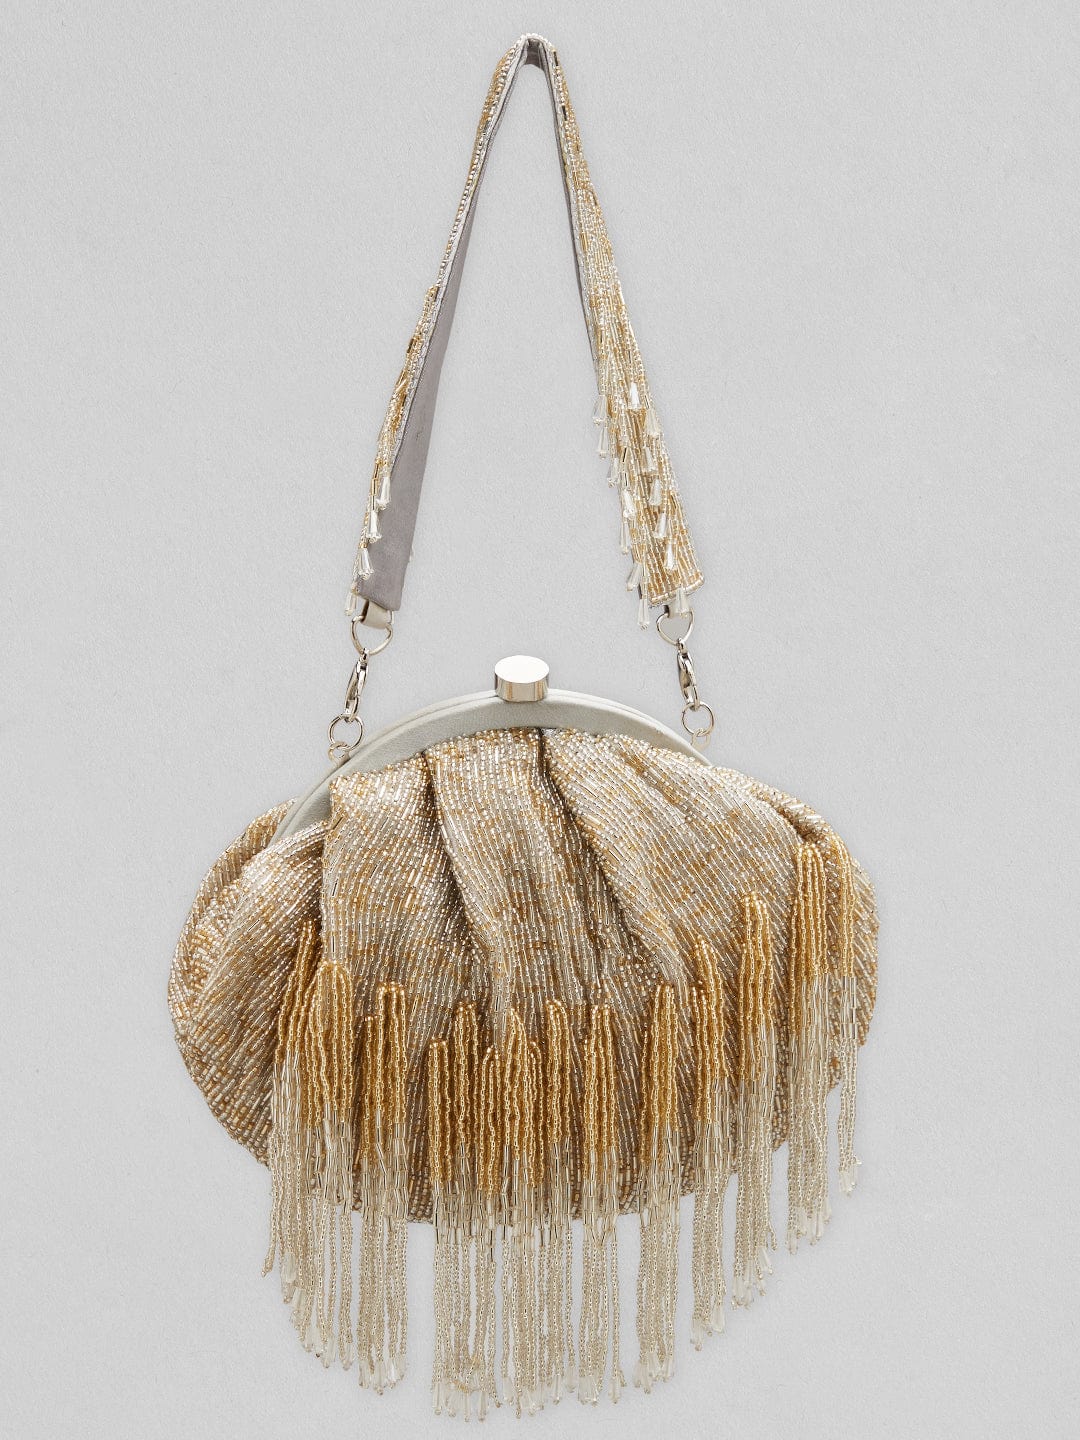 Rubans Grey And Golden Handmade Bag With Embroided Design And Tassels. Handbag & Wallet Accessories